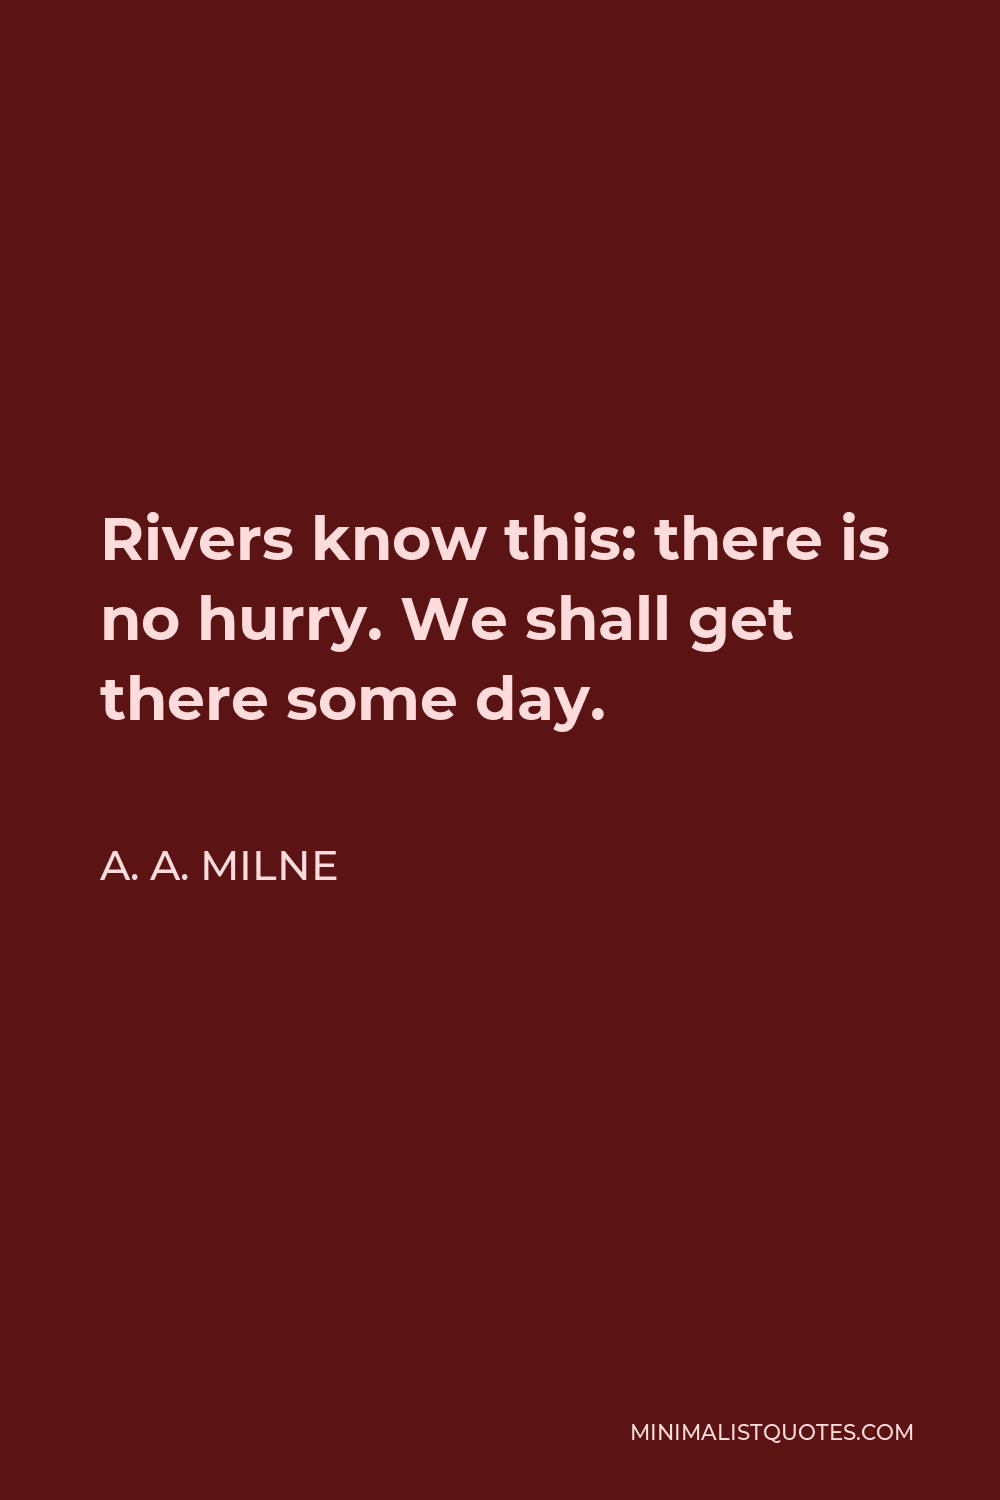 A. A. Milne Quote - Rivers know this: there is no hurry. We shall get there some day.